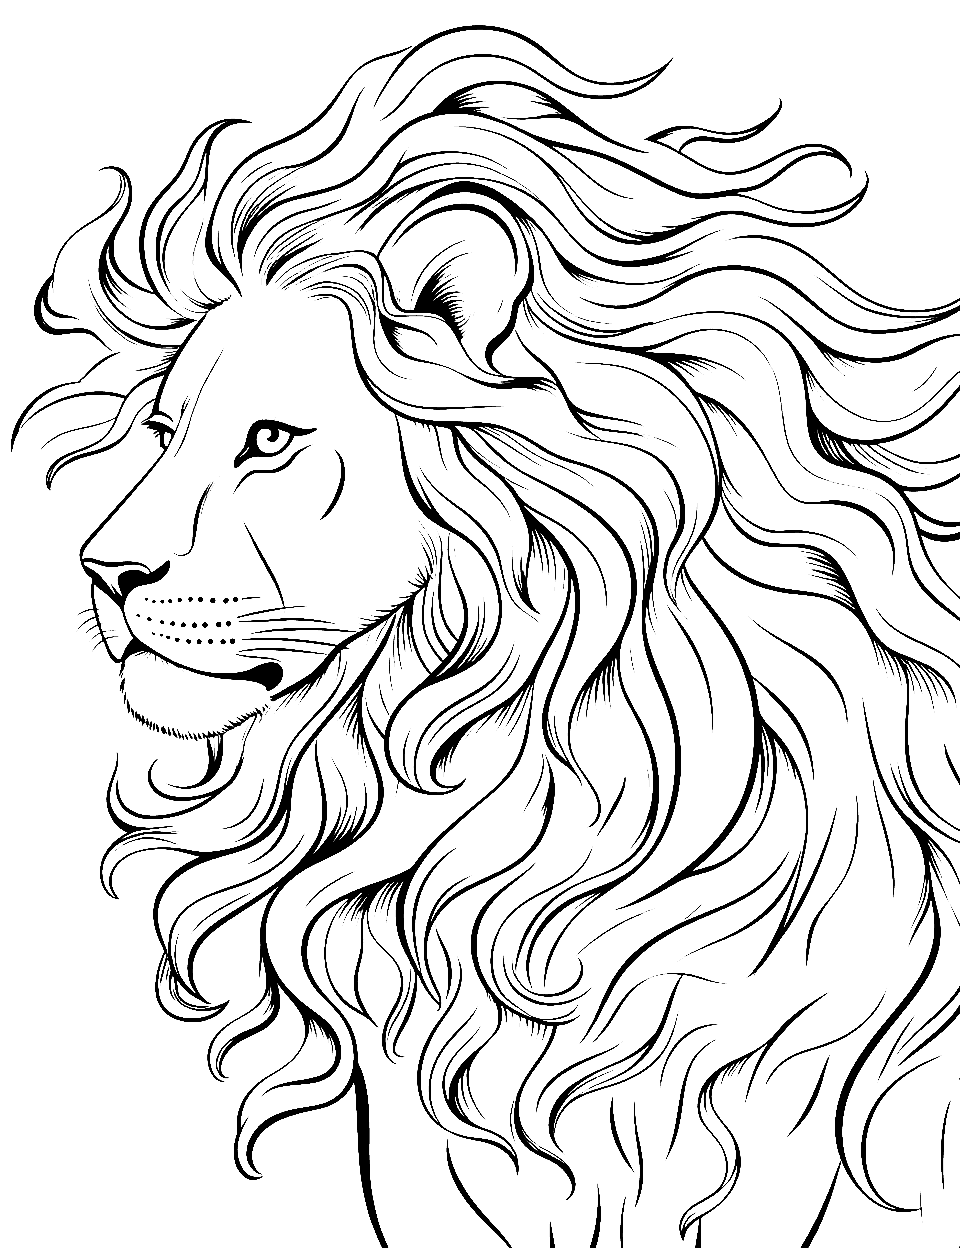 Mane in the Wind Coloring Page - A lion’s mane flowing in the strong wind.